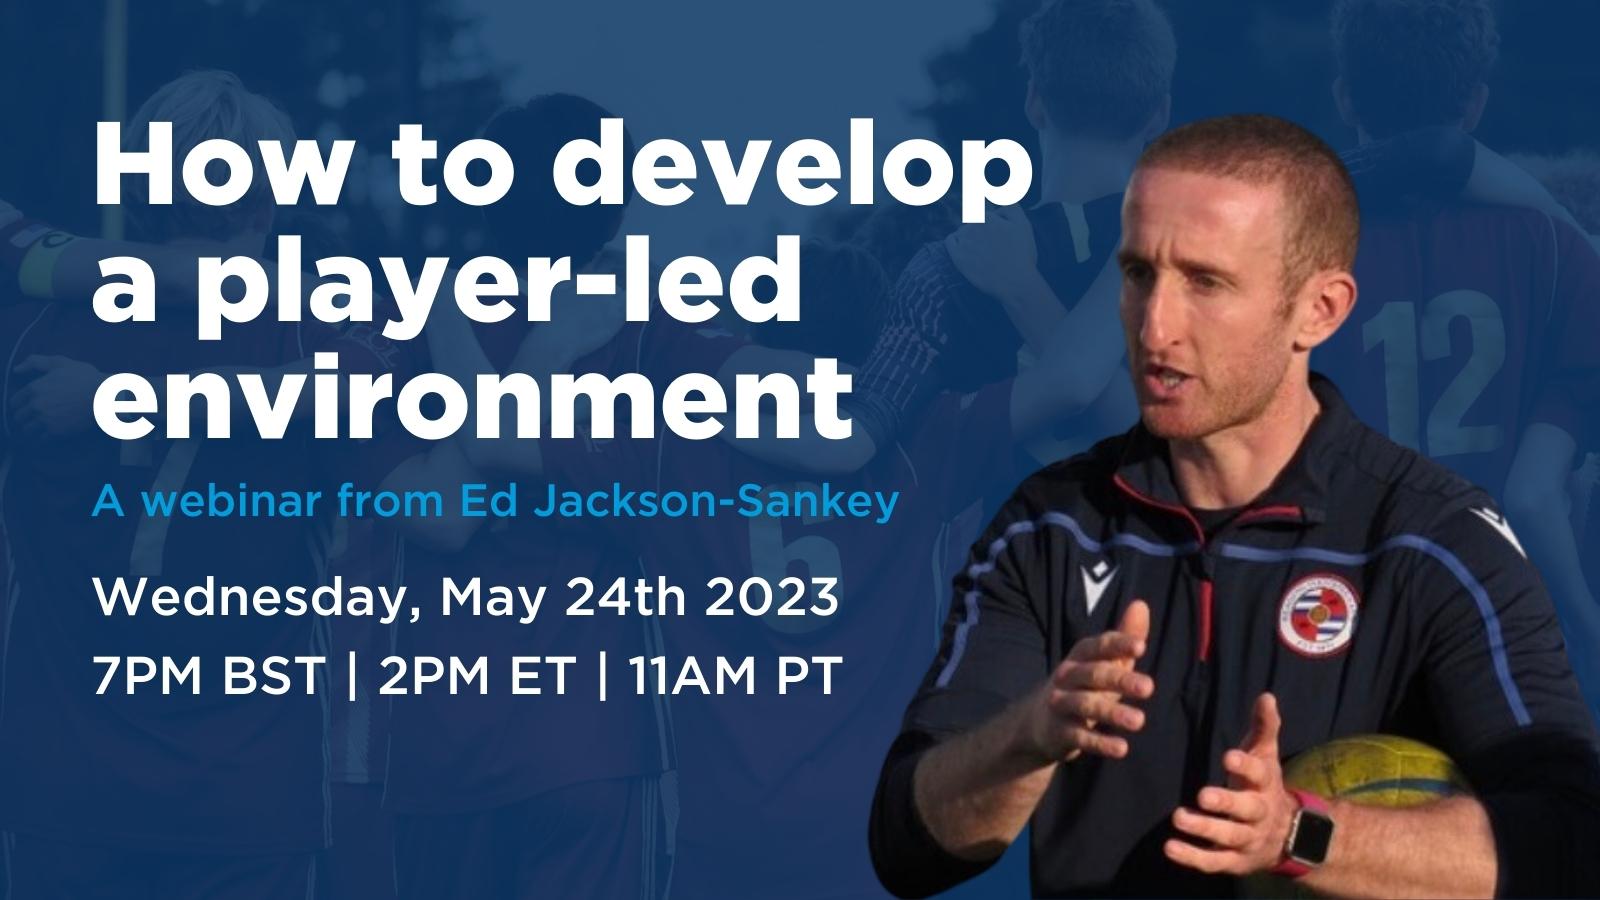 How to develop a player-led environment, with Ed Jackson-Sankey